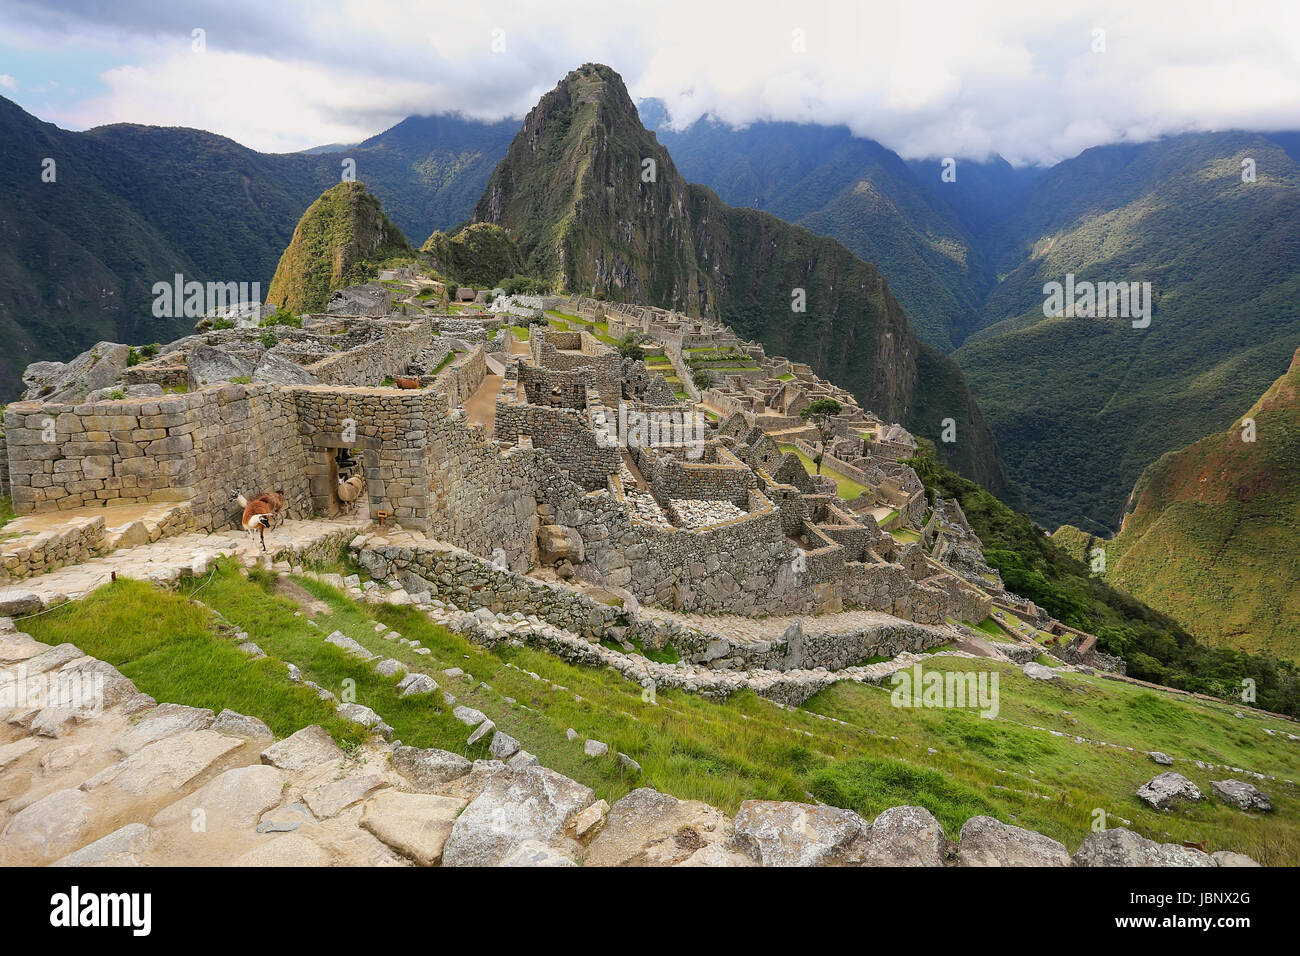 Inca citadel Machu Picchu in Peru. In 2007 Machu Picchu was voted one of the New Seven Wonders of the World. Stock Photo